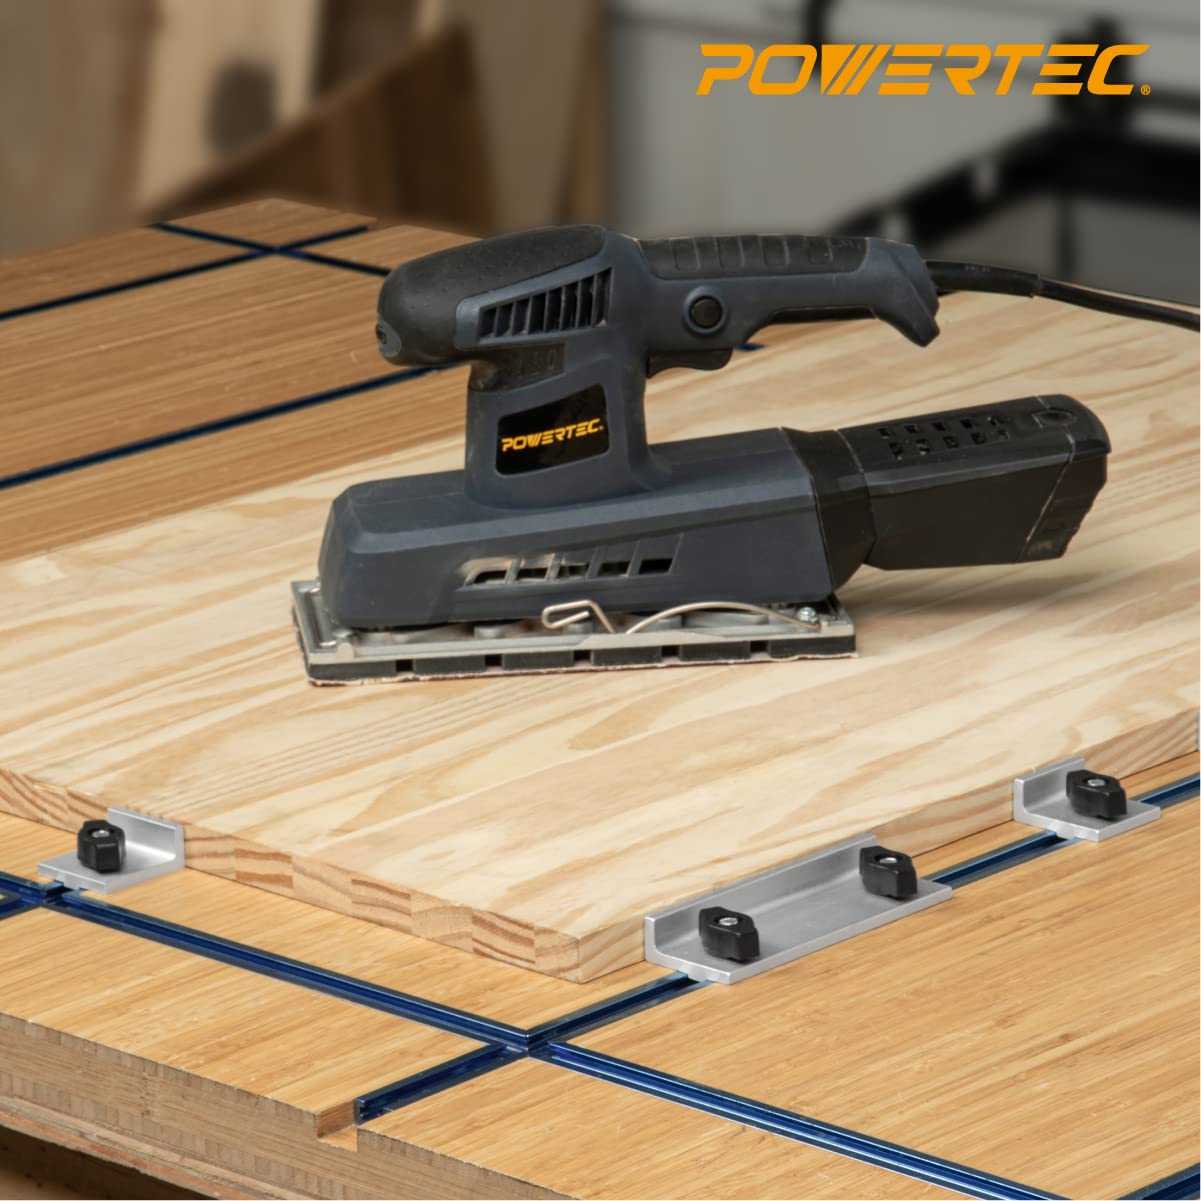 POWERTEC 71694 1-33/64" T-Track Inline and Short Stop Kit, T Track Stop Block for T-Track Woodworking, Sanding, and Routing, 4PK